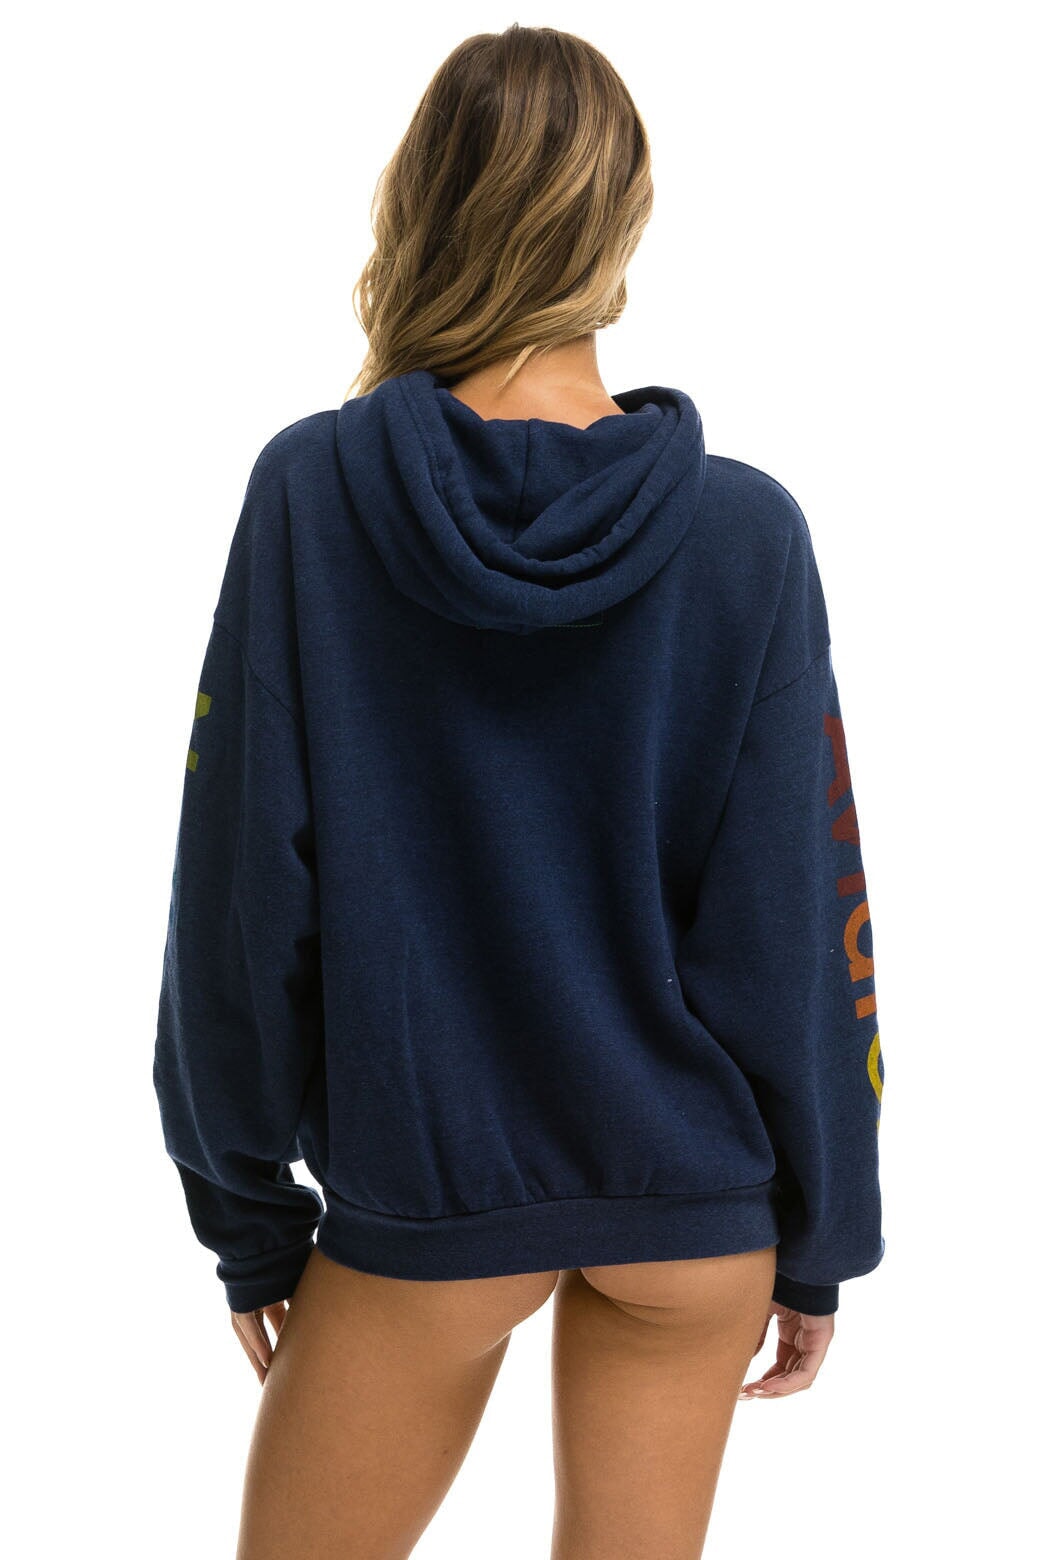 AVIATOR NATION AUSTIN RELAXED PULLOVER HOODIE - NAVY Hoodie Aviator Nation 